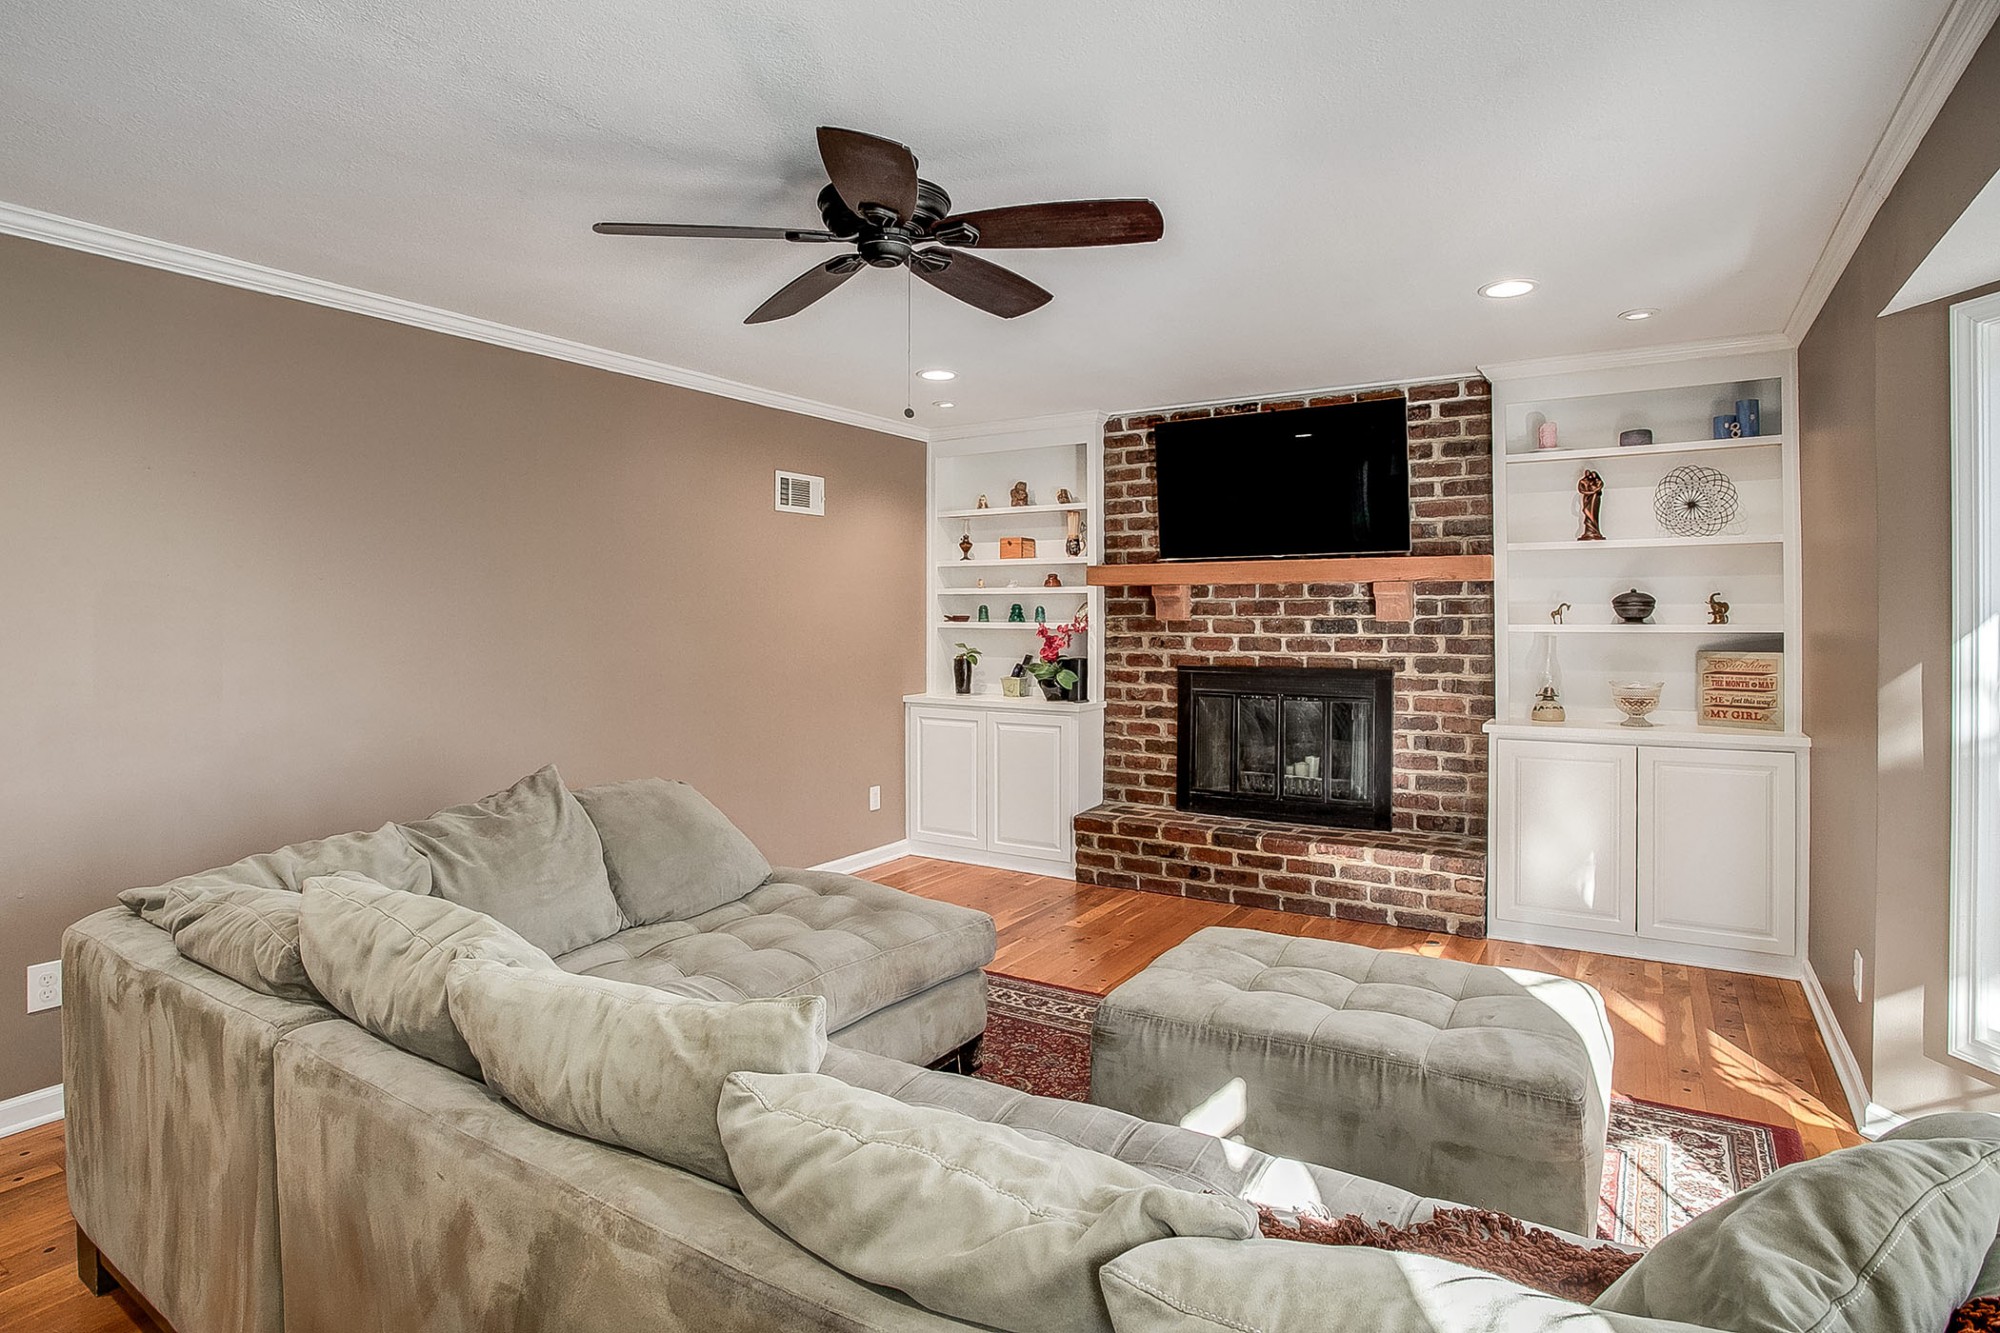 Continue to the first family room and relax by the handsome masonry floor-to-ceiling fireplace flanked by built-ins.